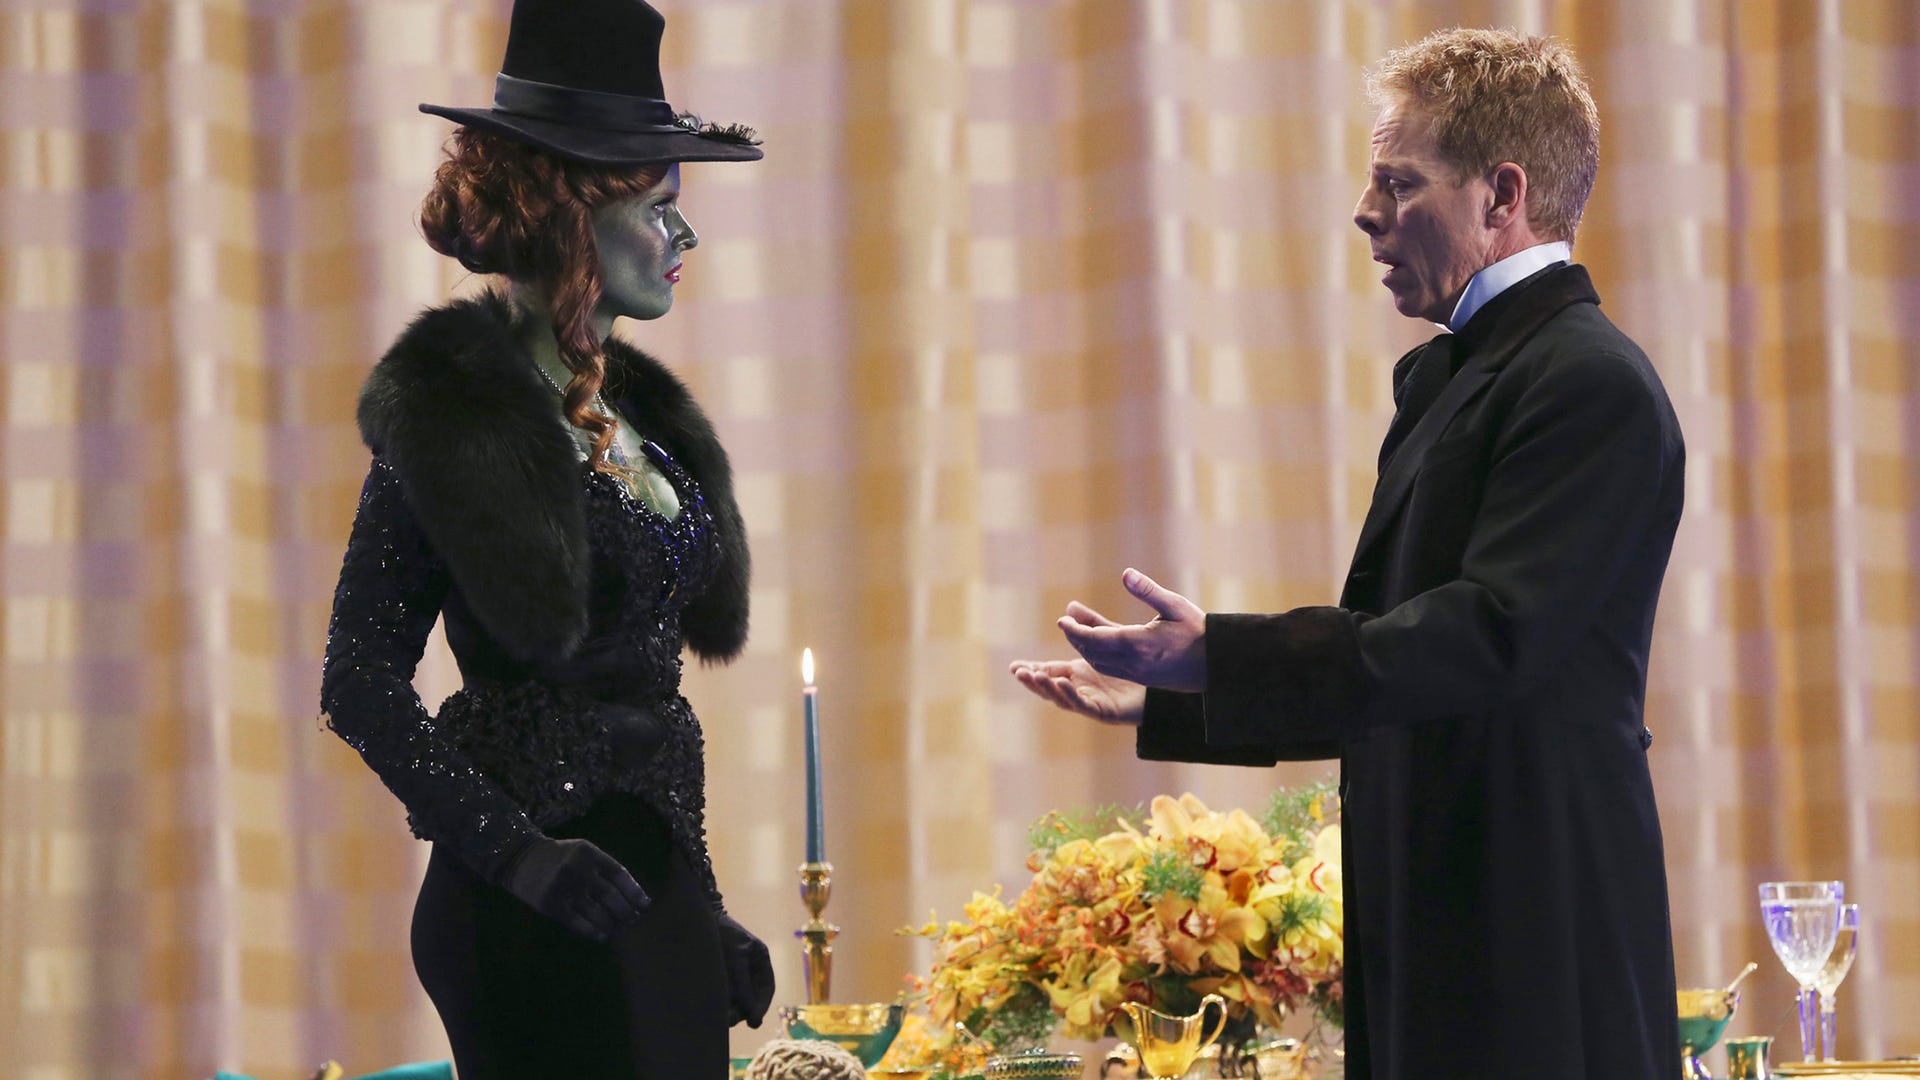 Rebecca Mader and Greg Germann, Once Upon a Time